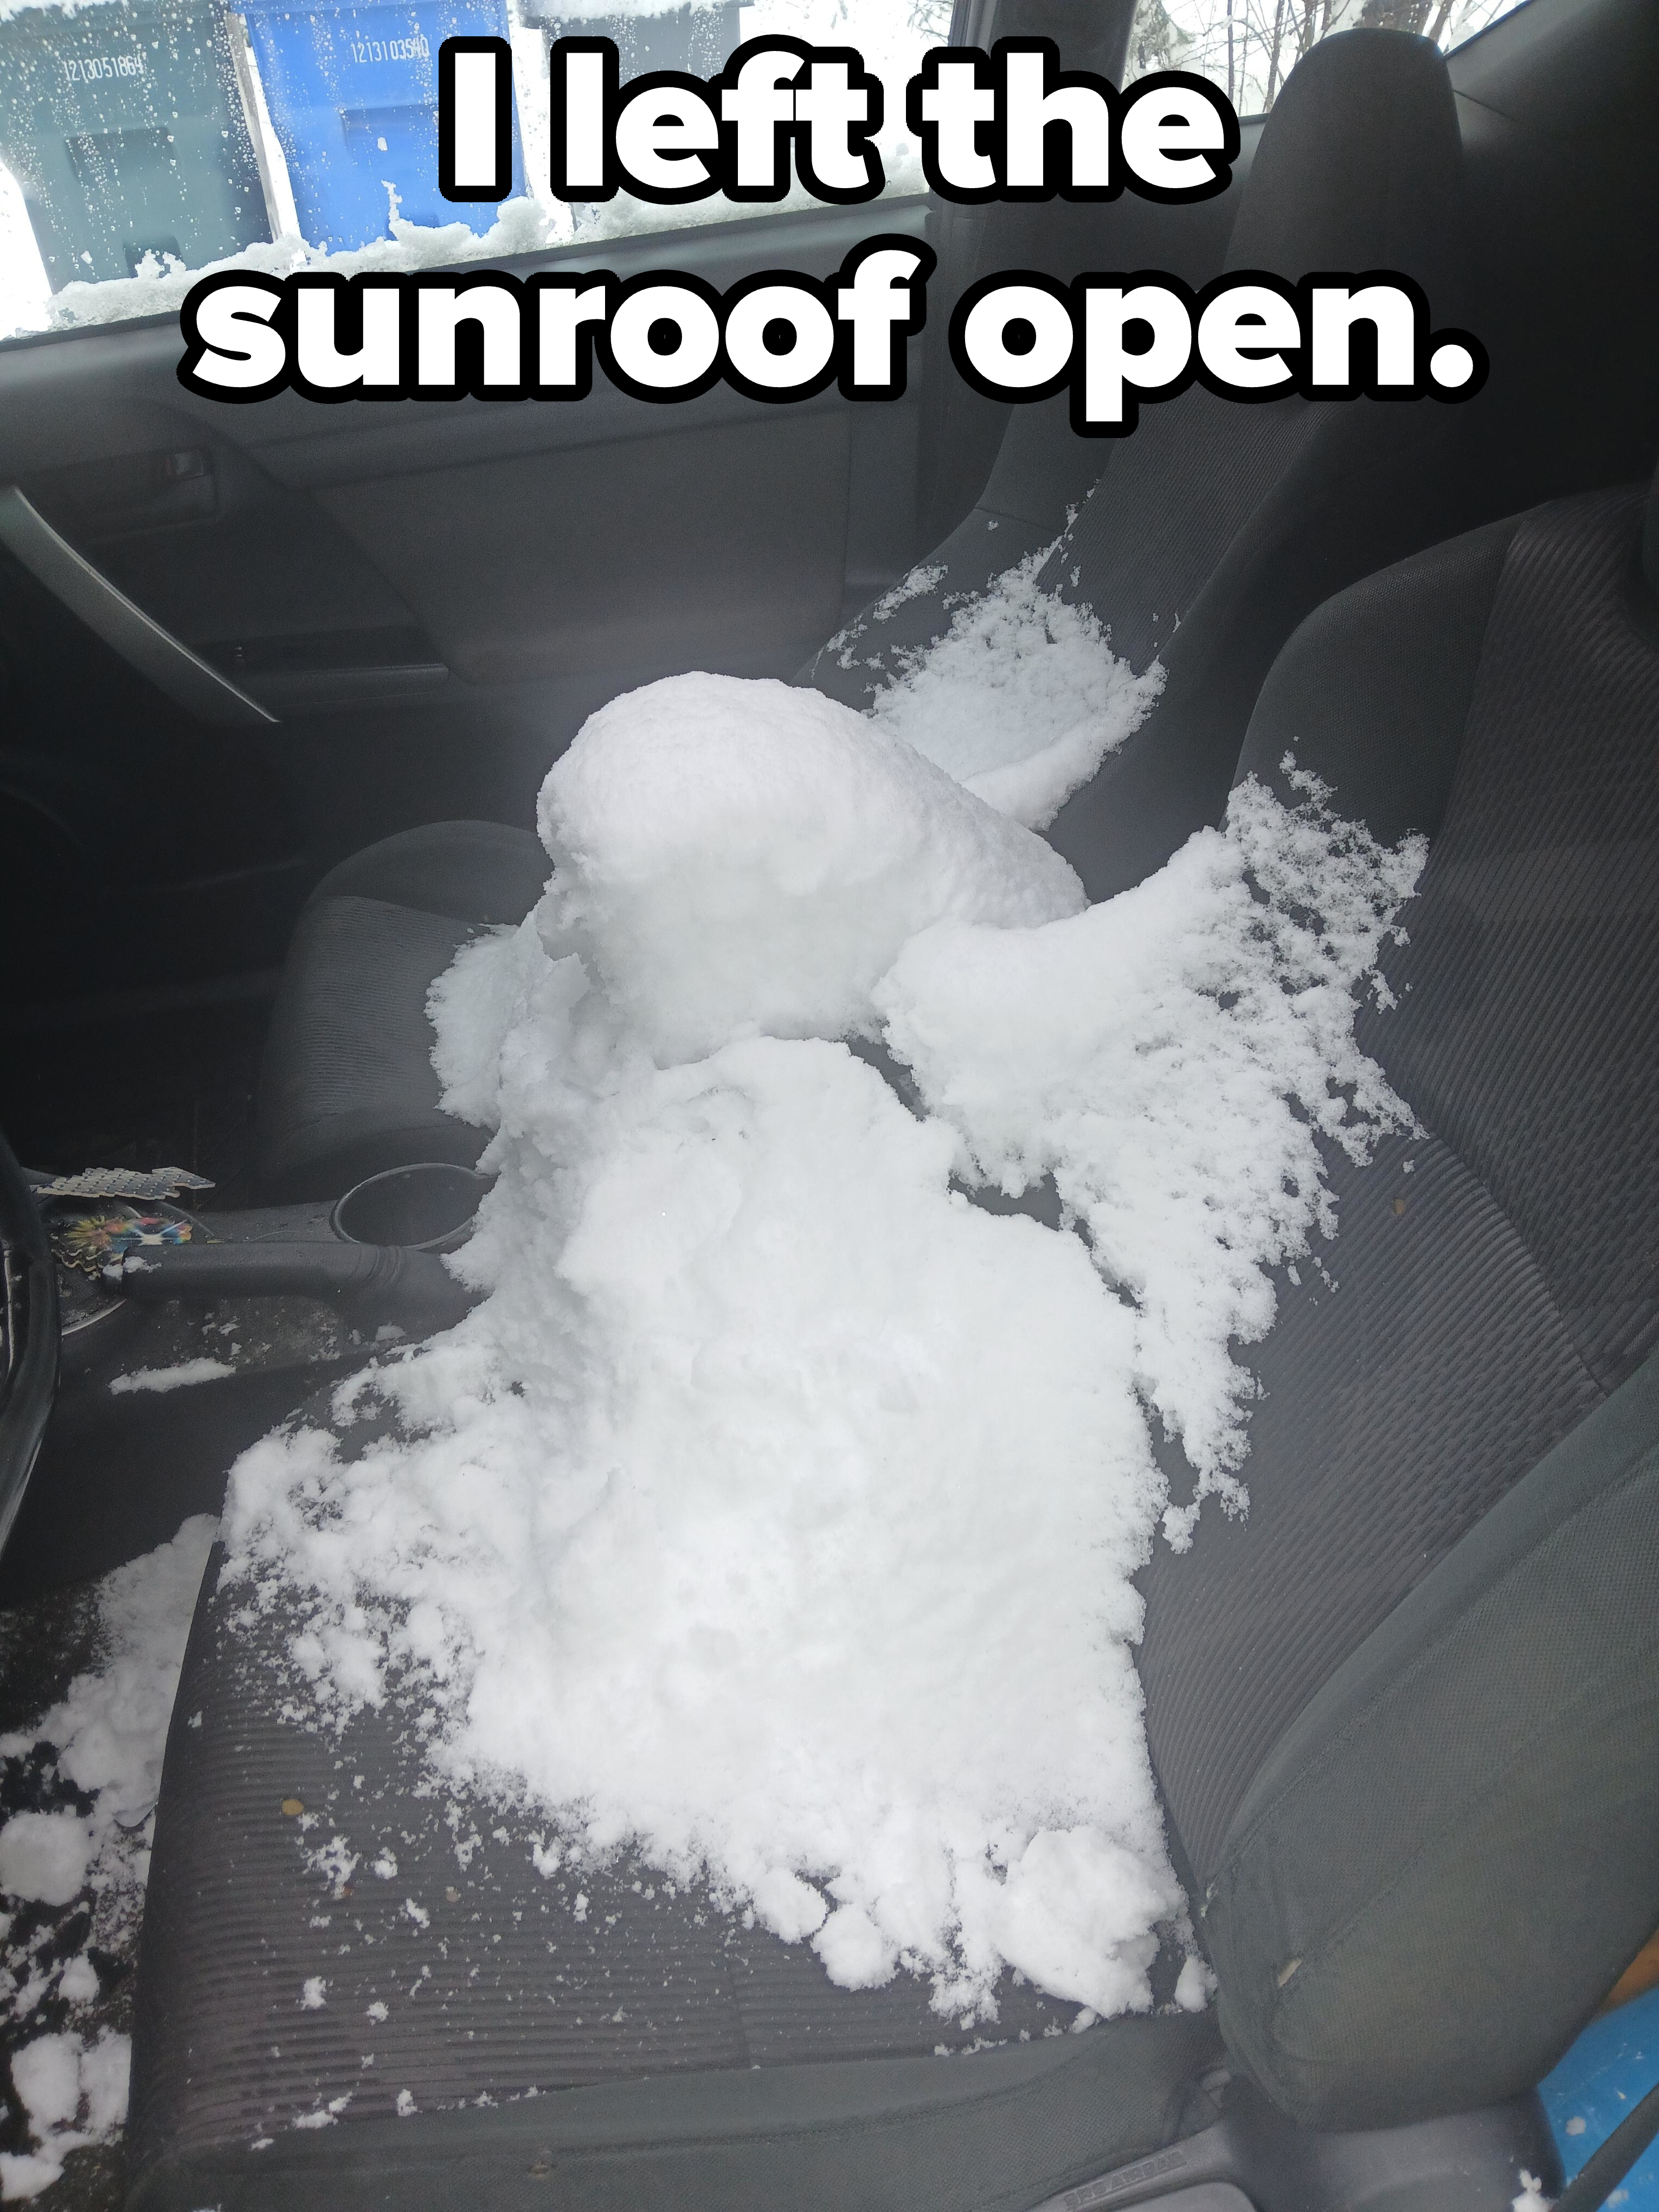 Heaped snow on a car&#x27;s passenger seat, suggesting the window was left open